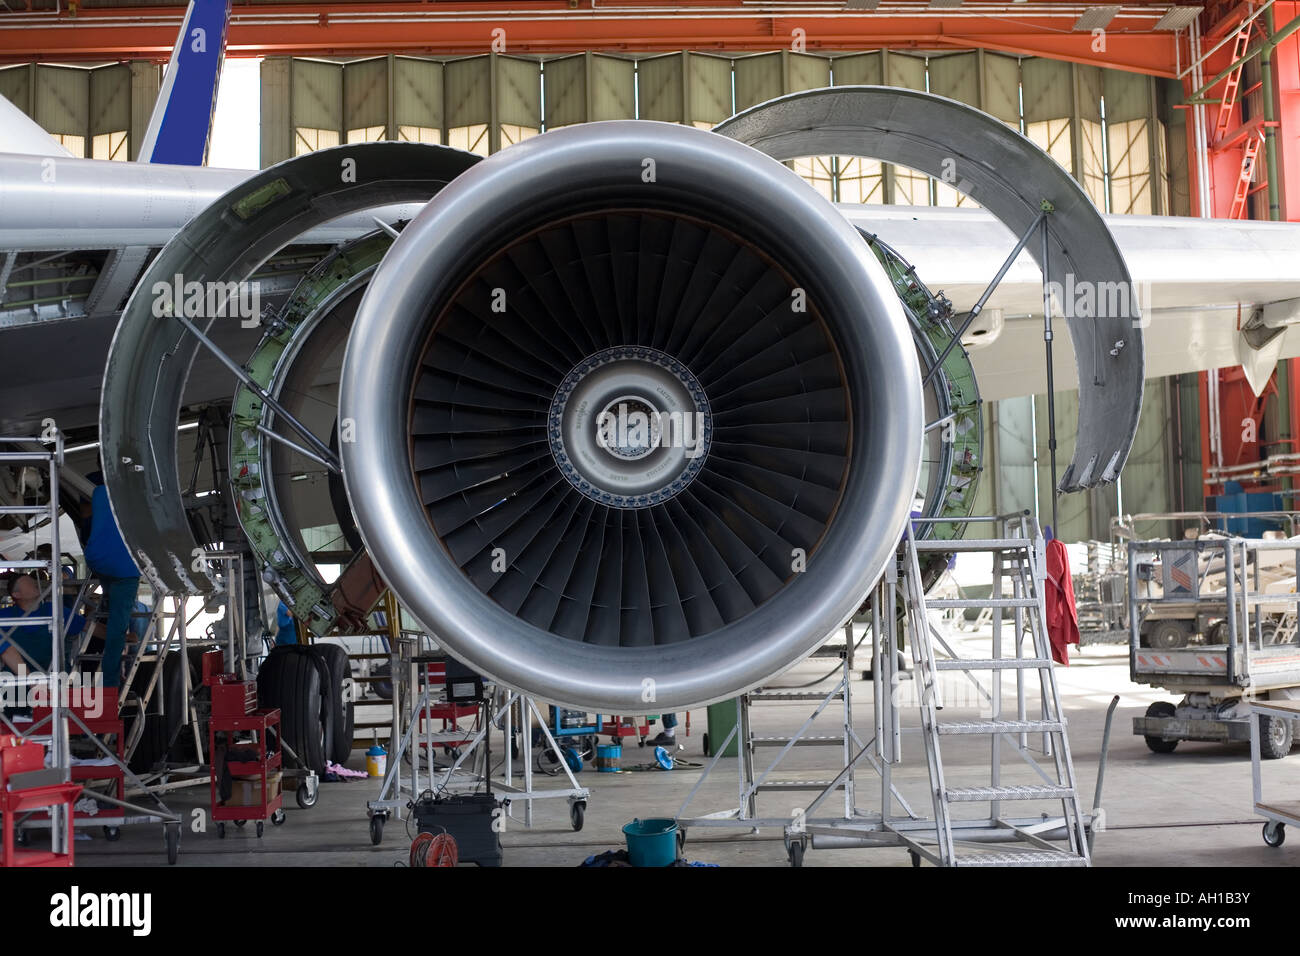 opened aircraft engine in the hangar Stock Photo